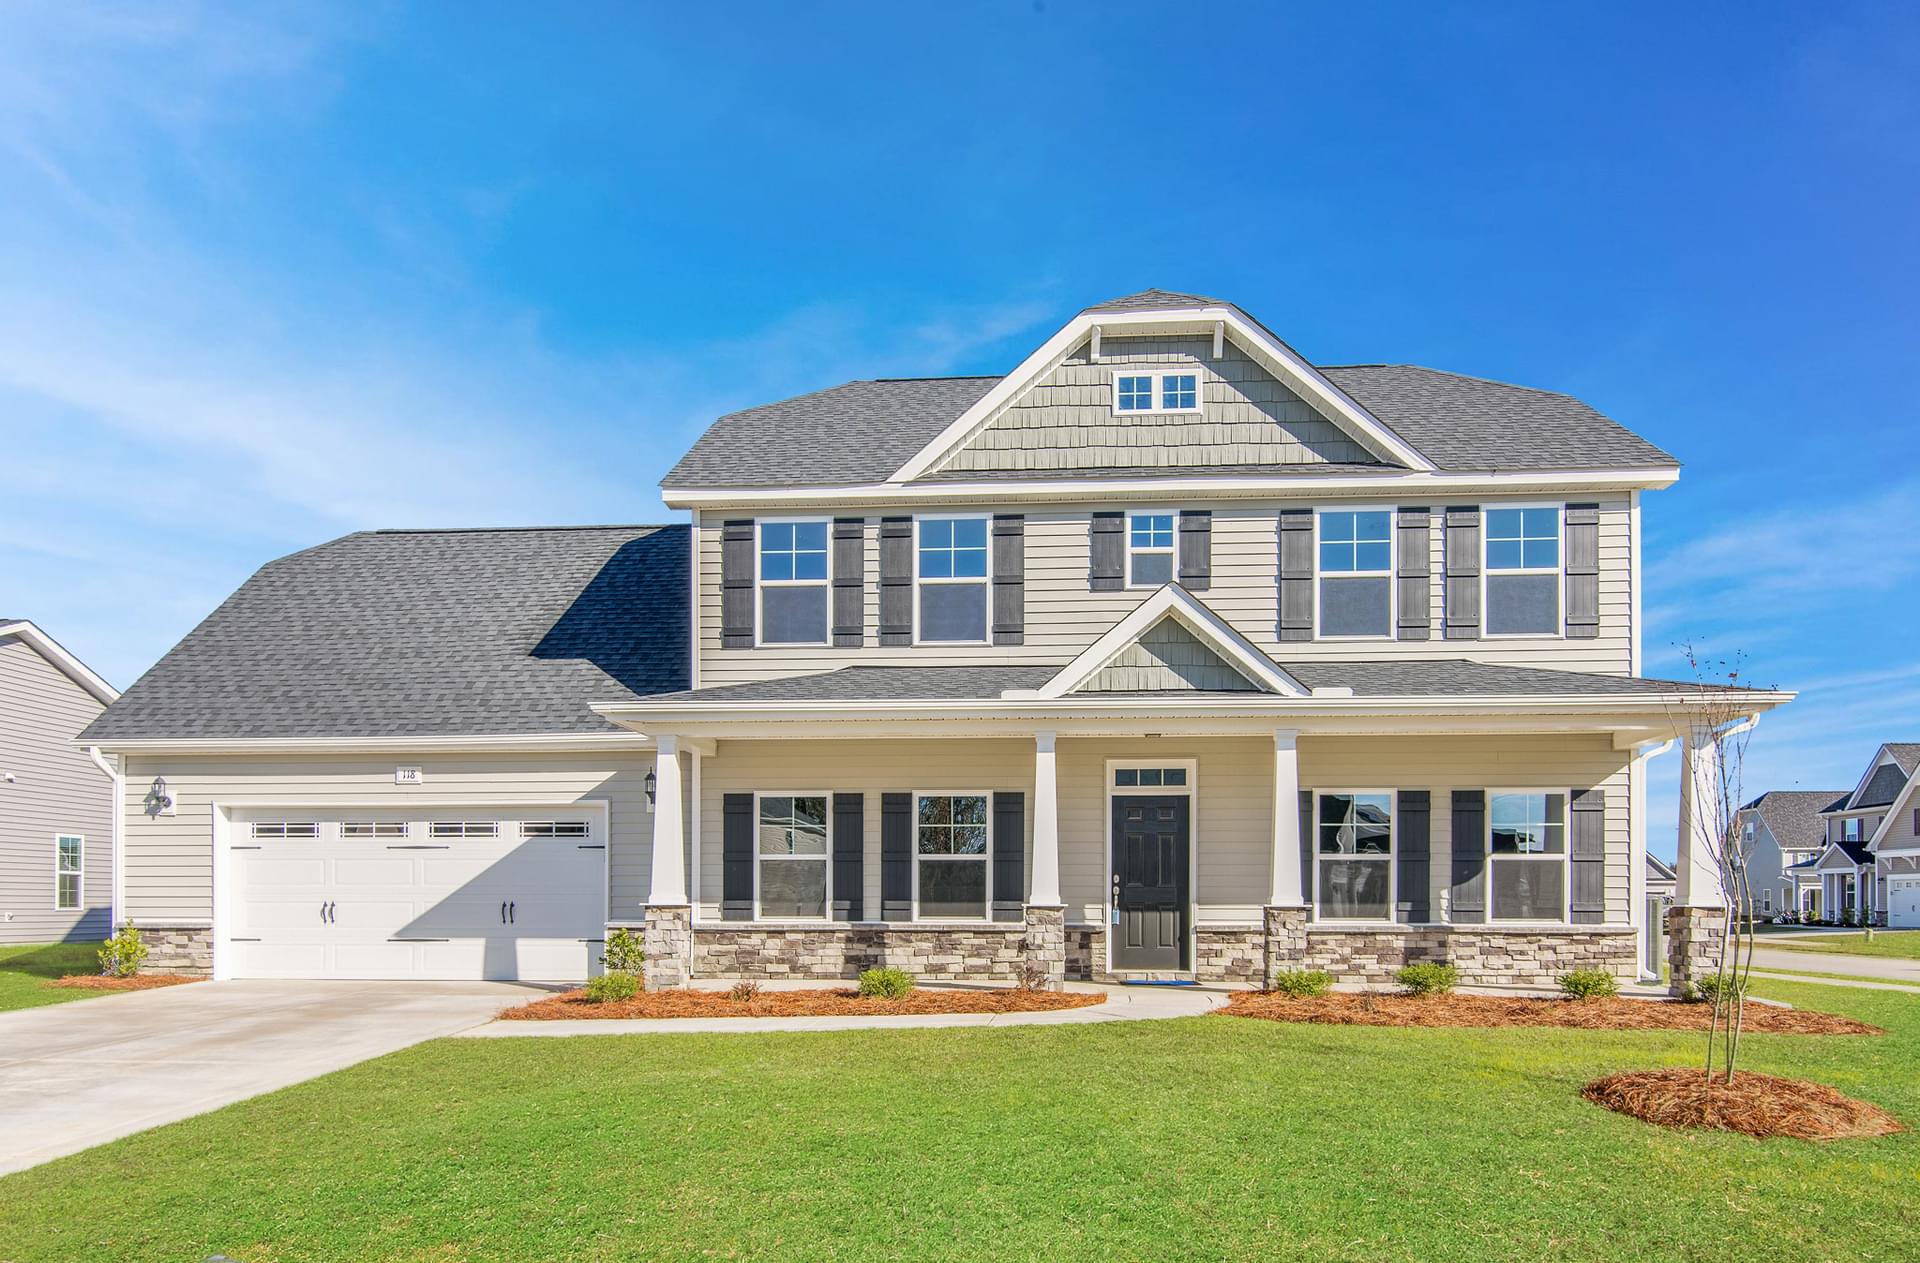 New Homes in Wake Forest, NC Sterling Crest from Caviness & Cates